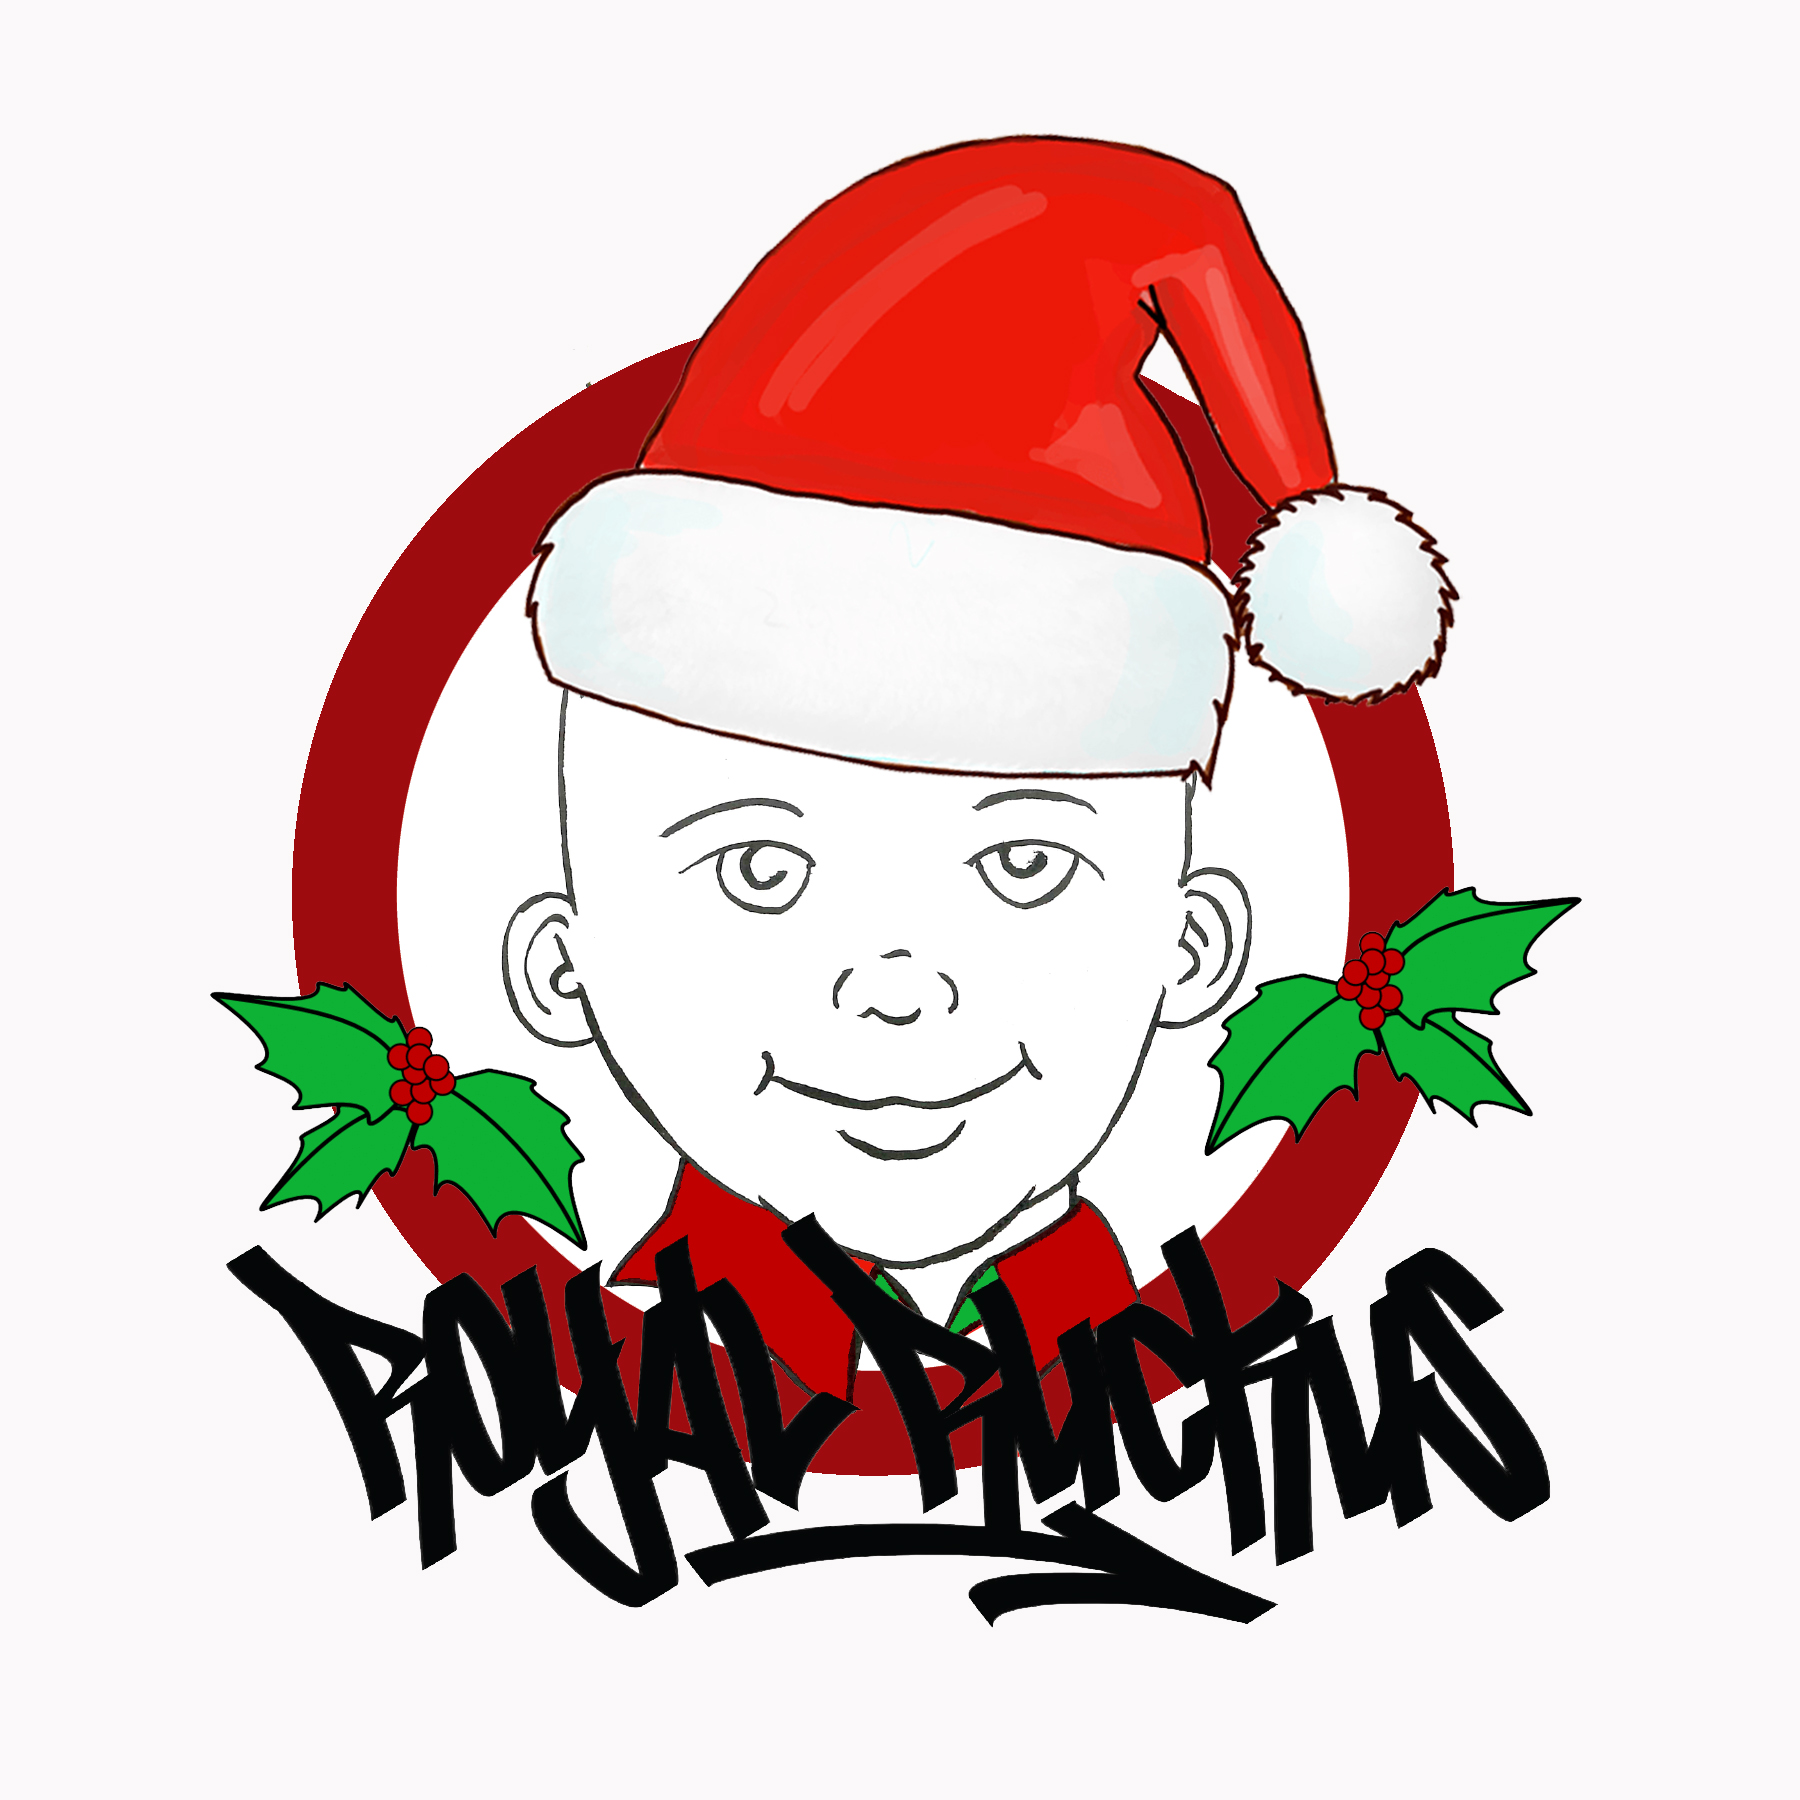 Ep. 18: Christmas Hip-Hop Special: Chunjay impersonates a DJ and plays some great holiday tunes.